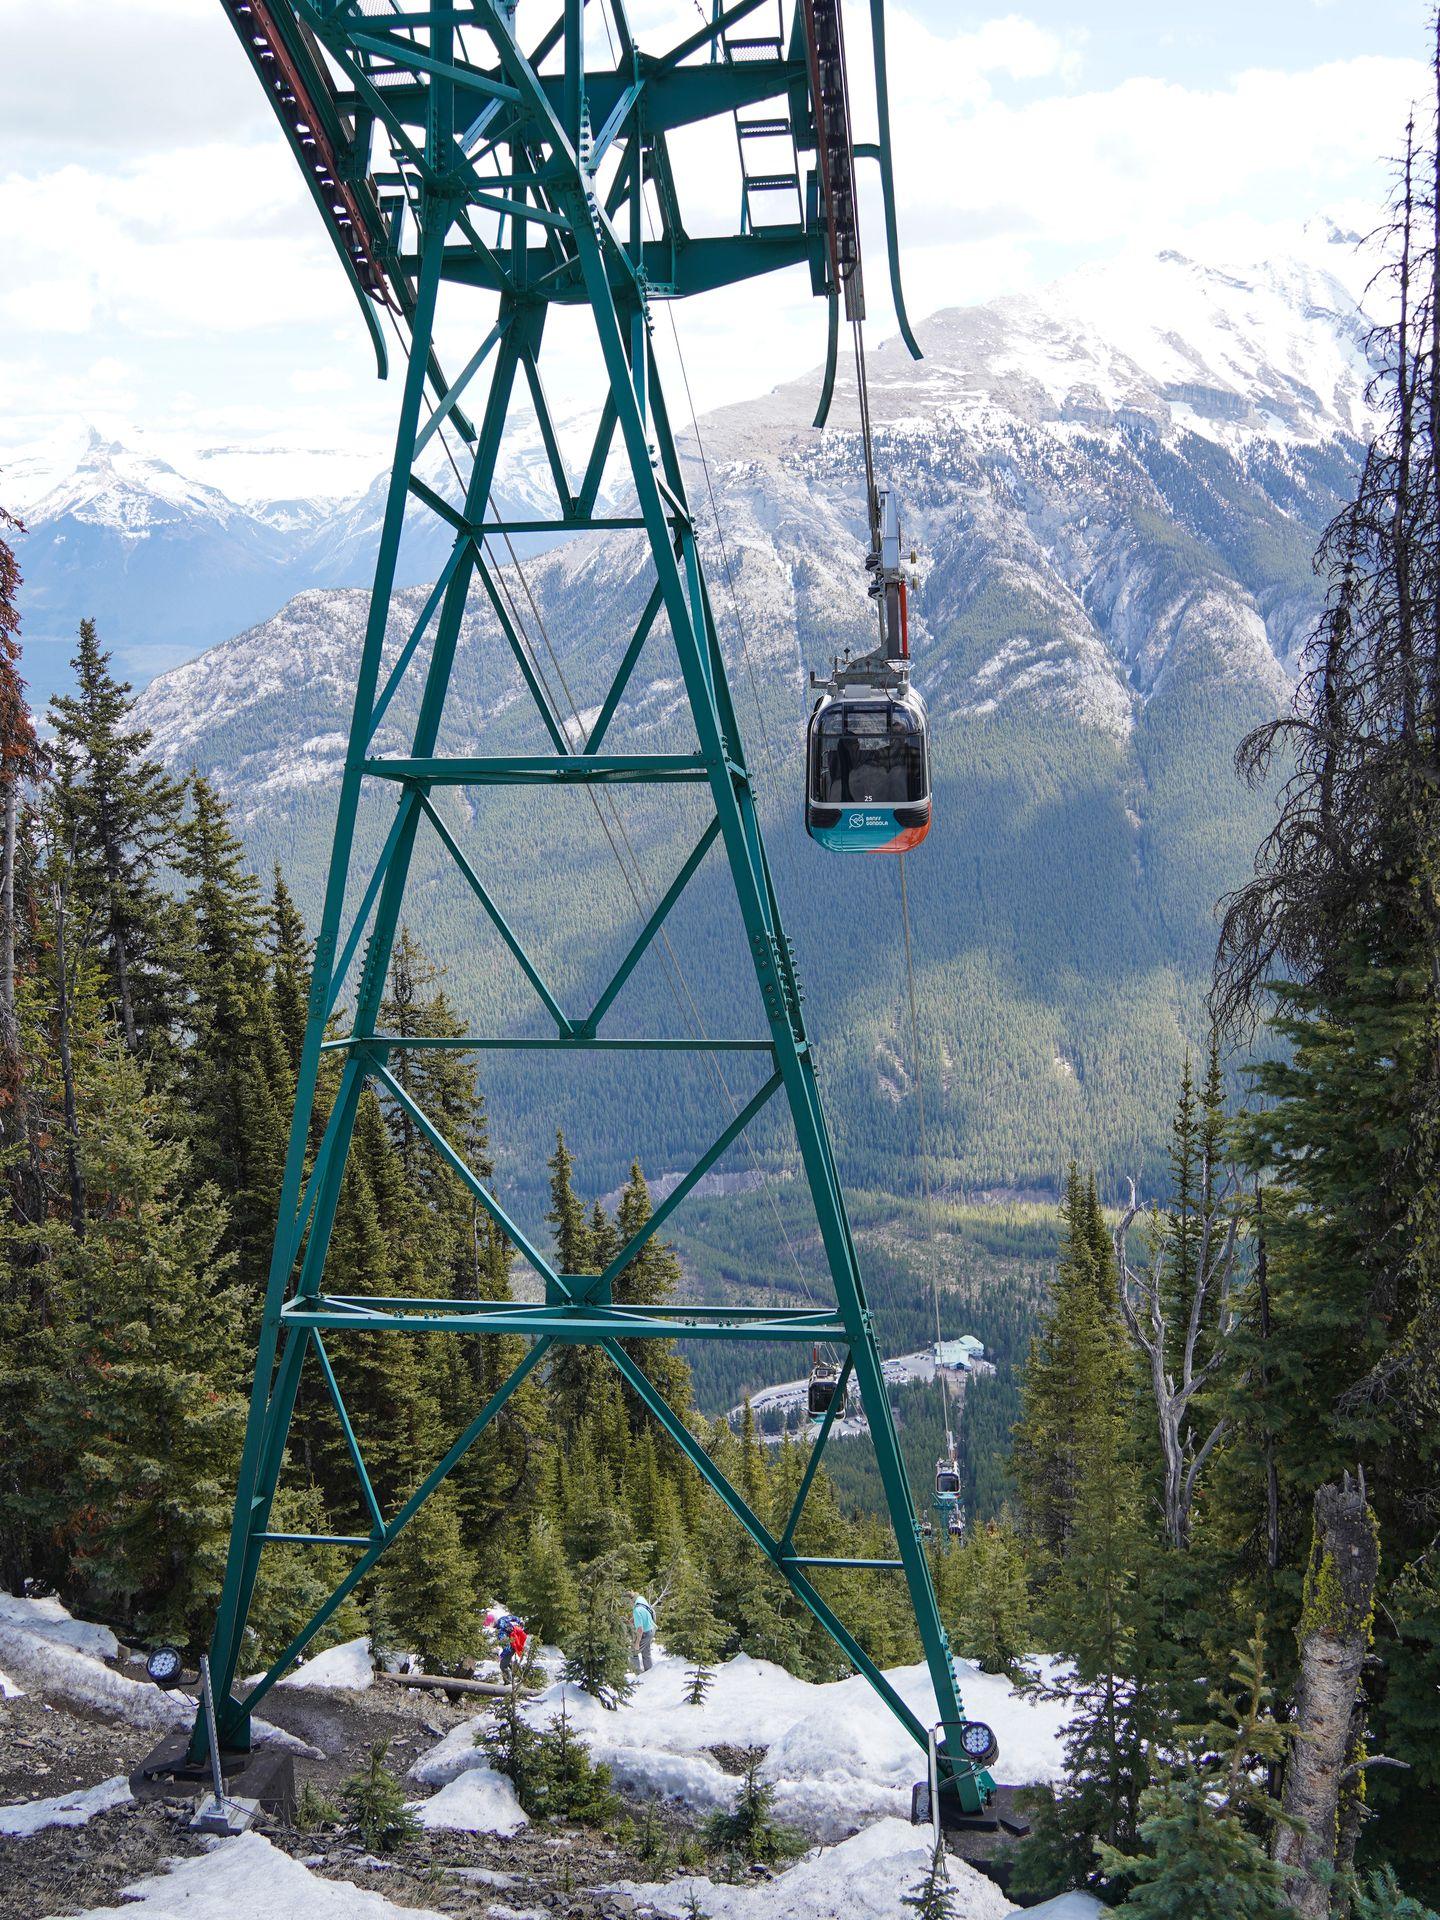 A view of the Sulphur Mountain Gondola. The tower is tall and green.